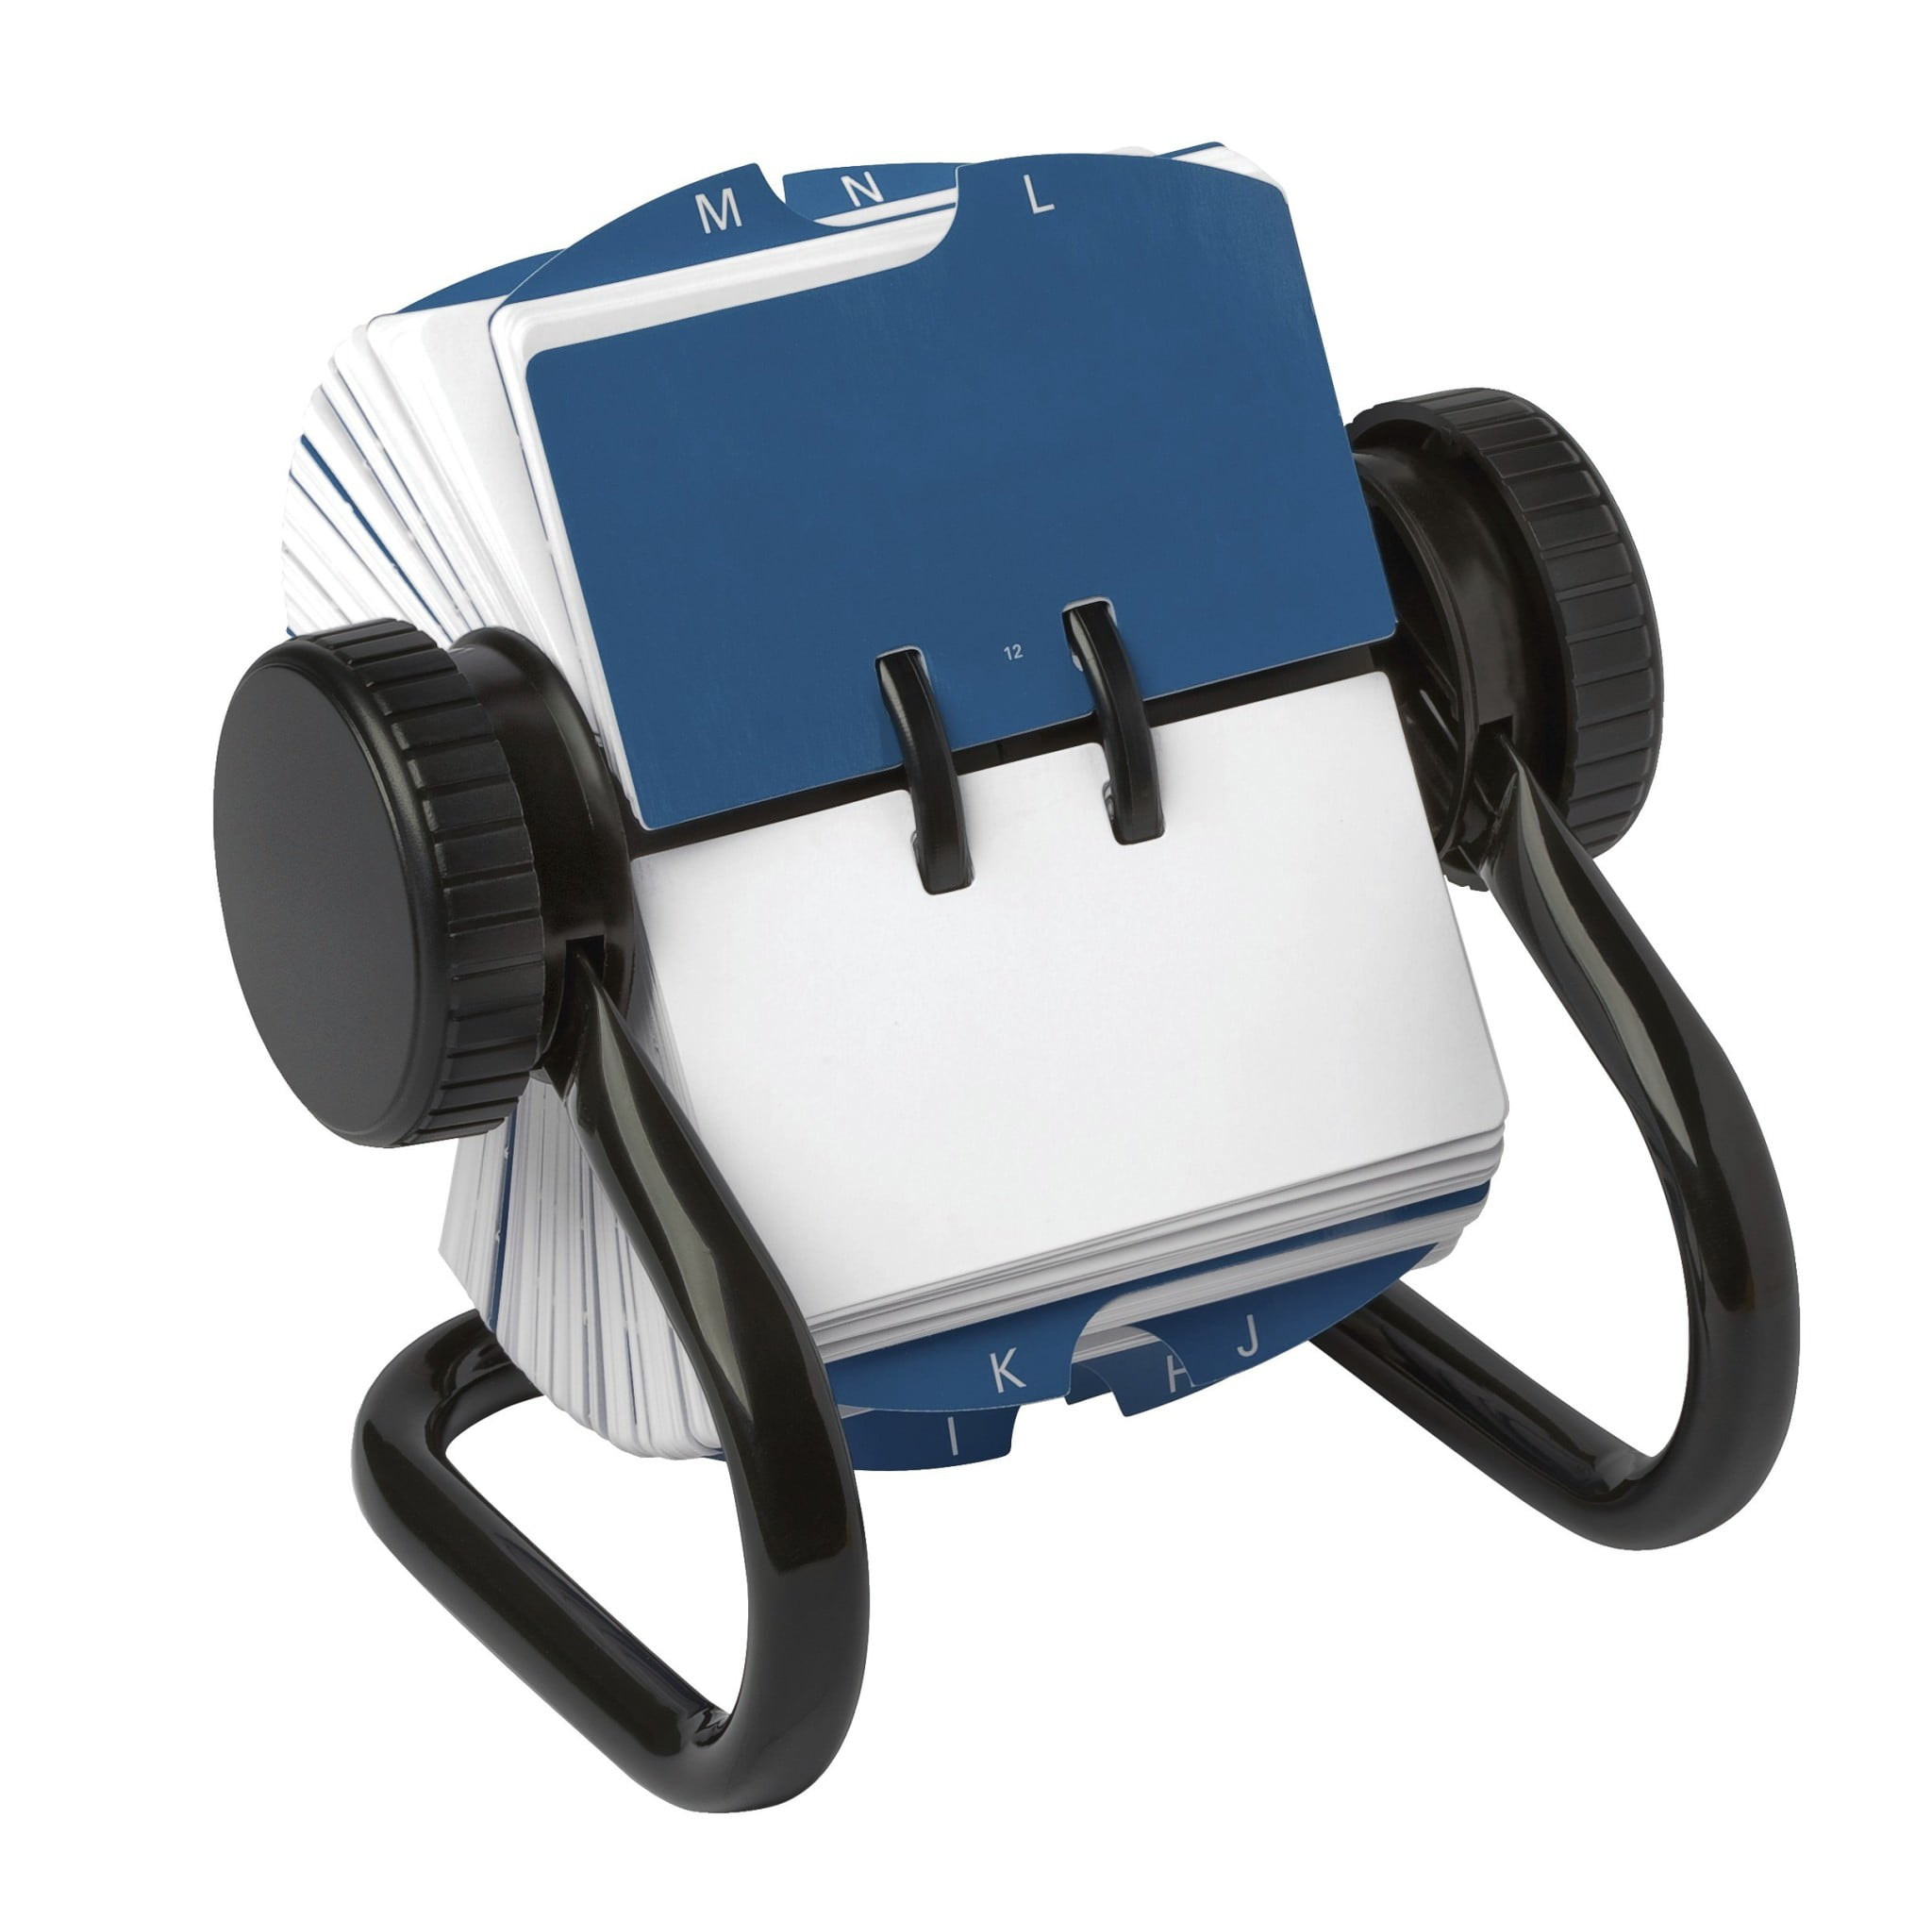 Rolodex Card File 50 Cards 2 1/4" X 4" 15352as Organization Desk for sale online 